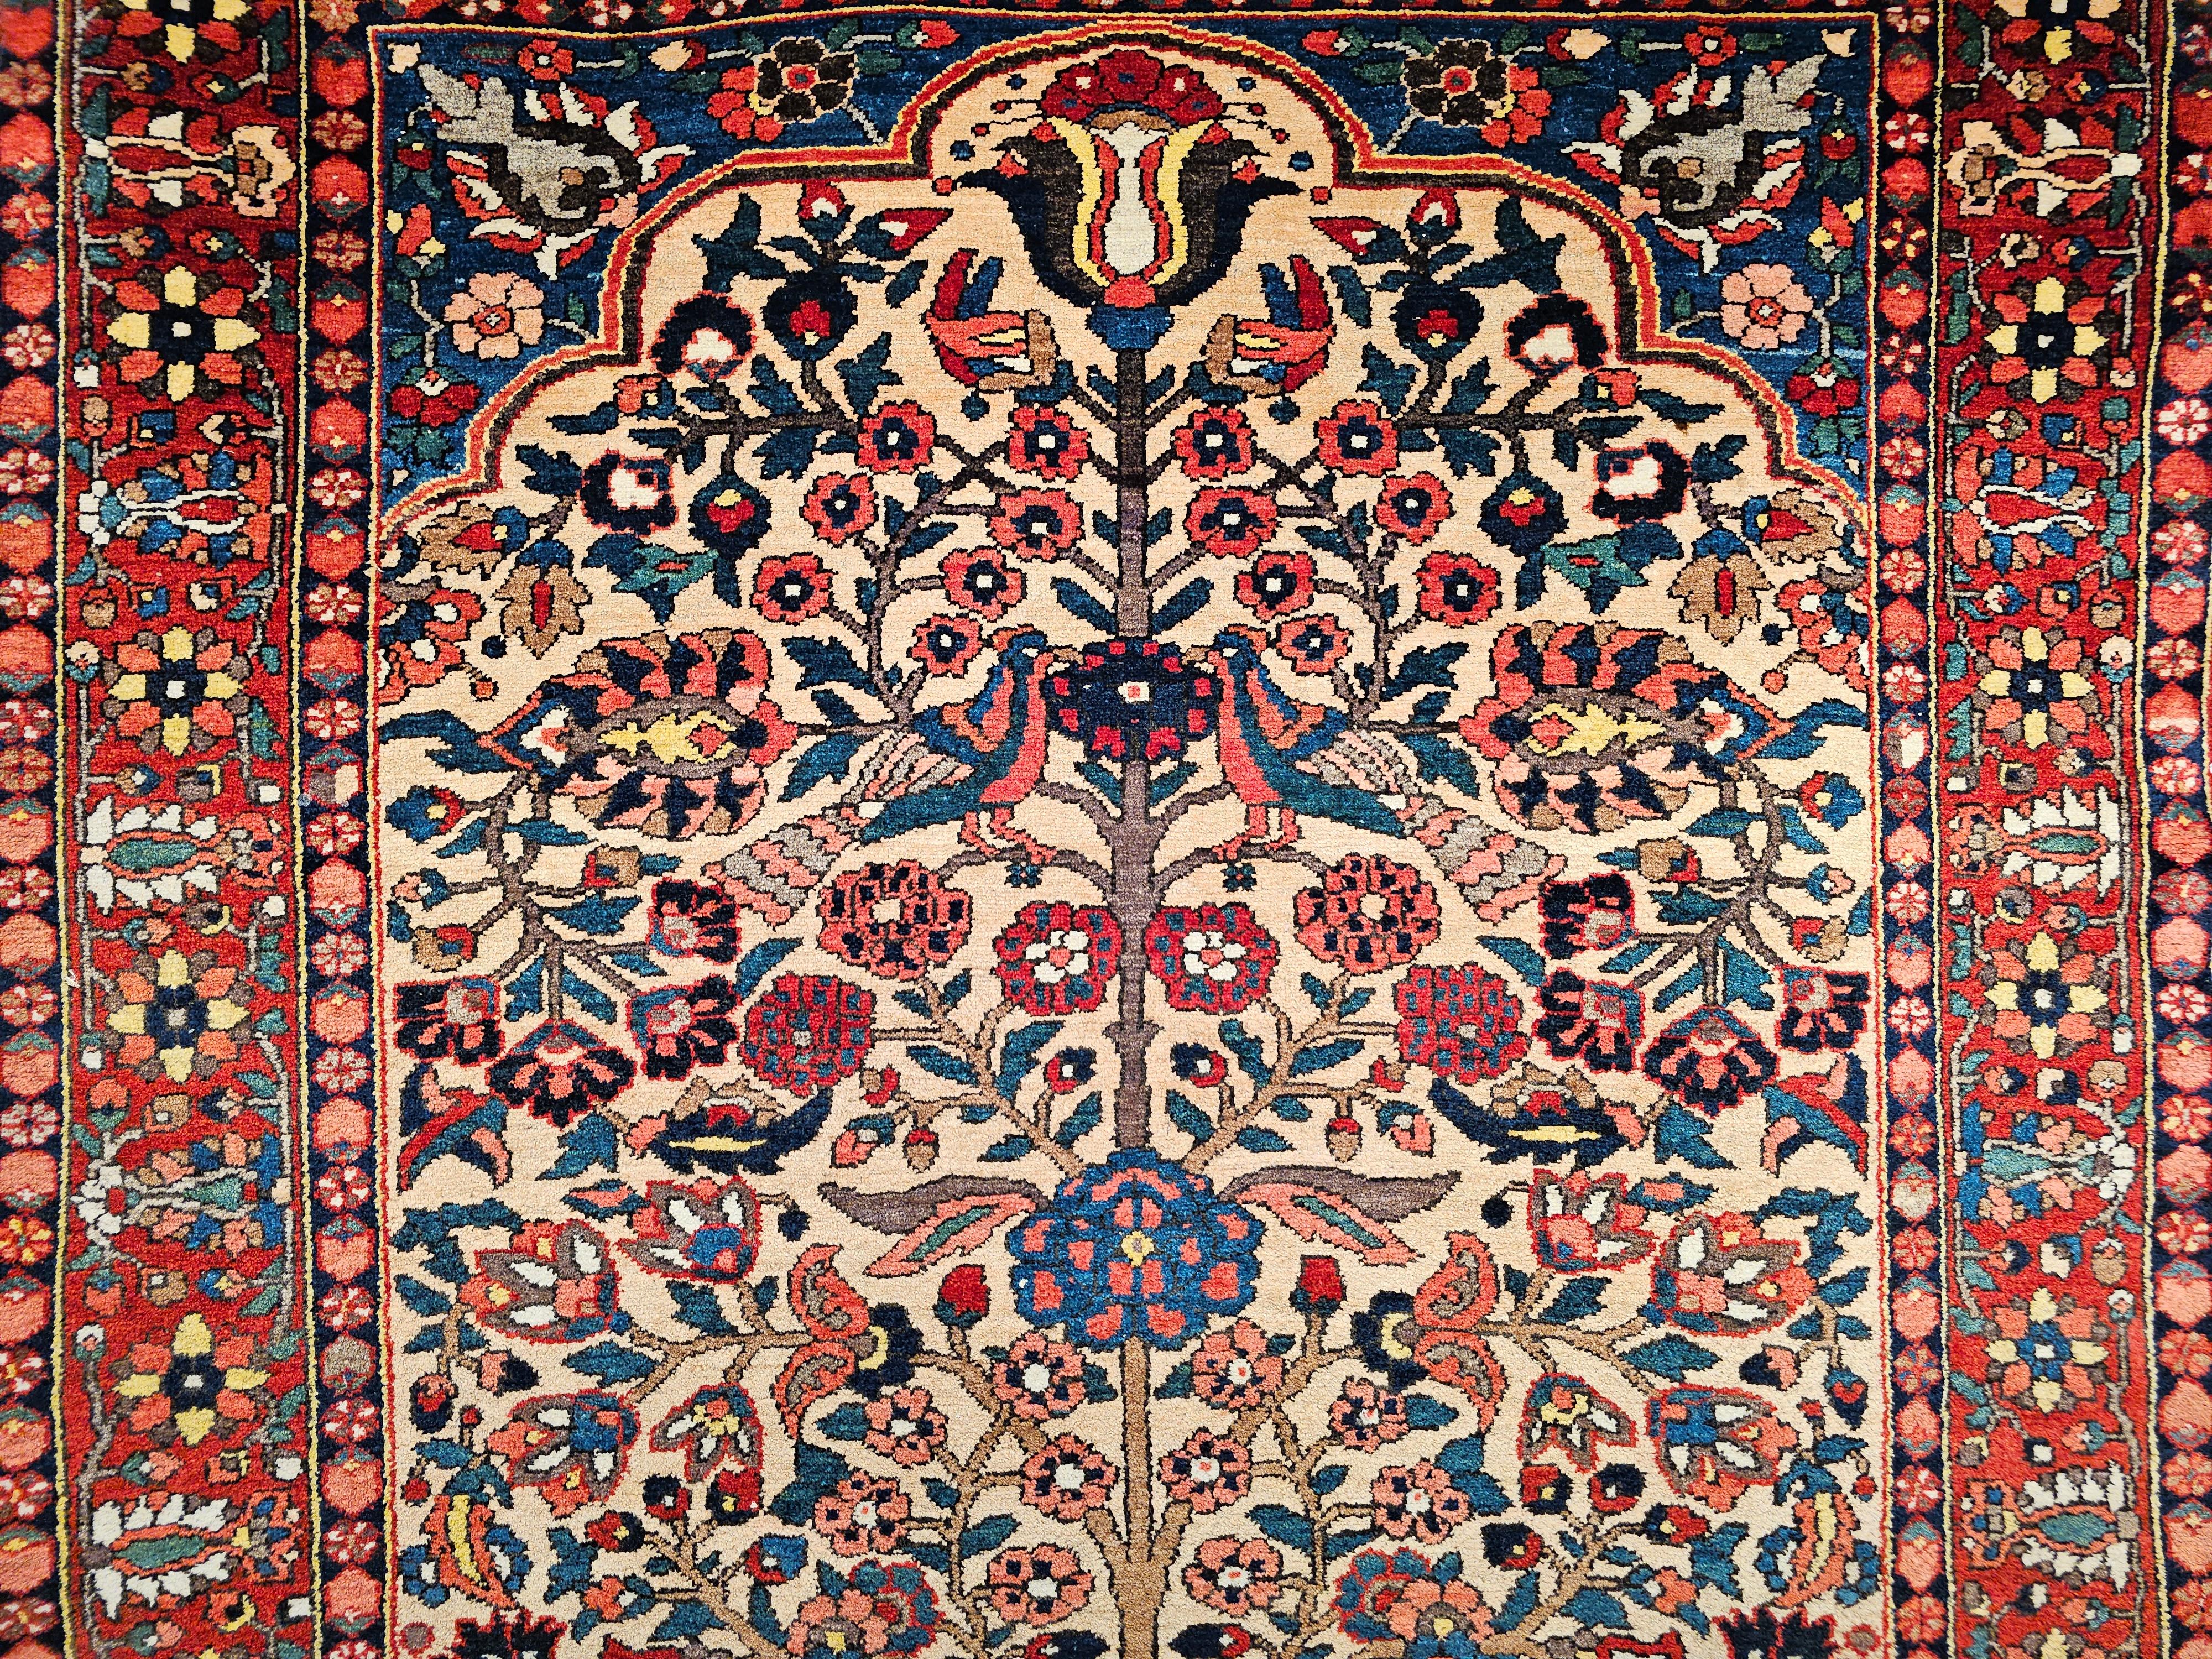 A 19th century hand-woven Persian Bakhtiari Bibibaft in vase pattern in a pale yellow with red border and French blue corners,.  A truly magnificent masterpiece in design and fine weaving from the Bakhtiari tribes of western Persia from the 4th